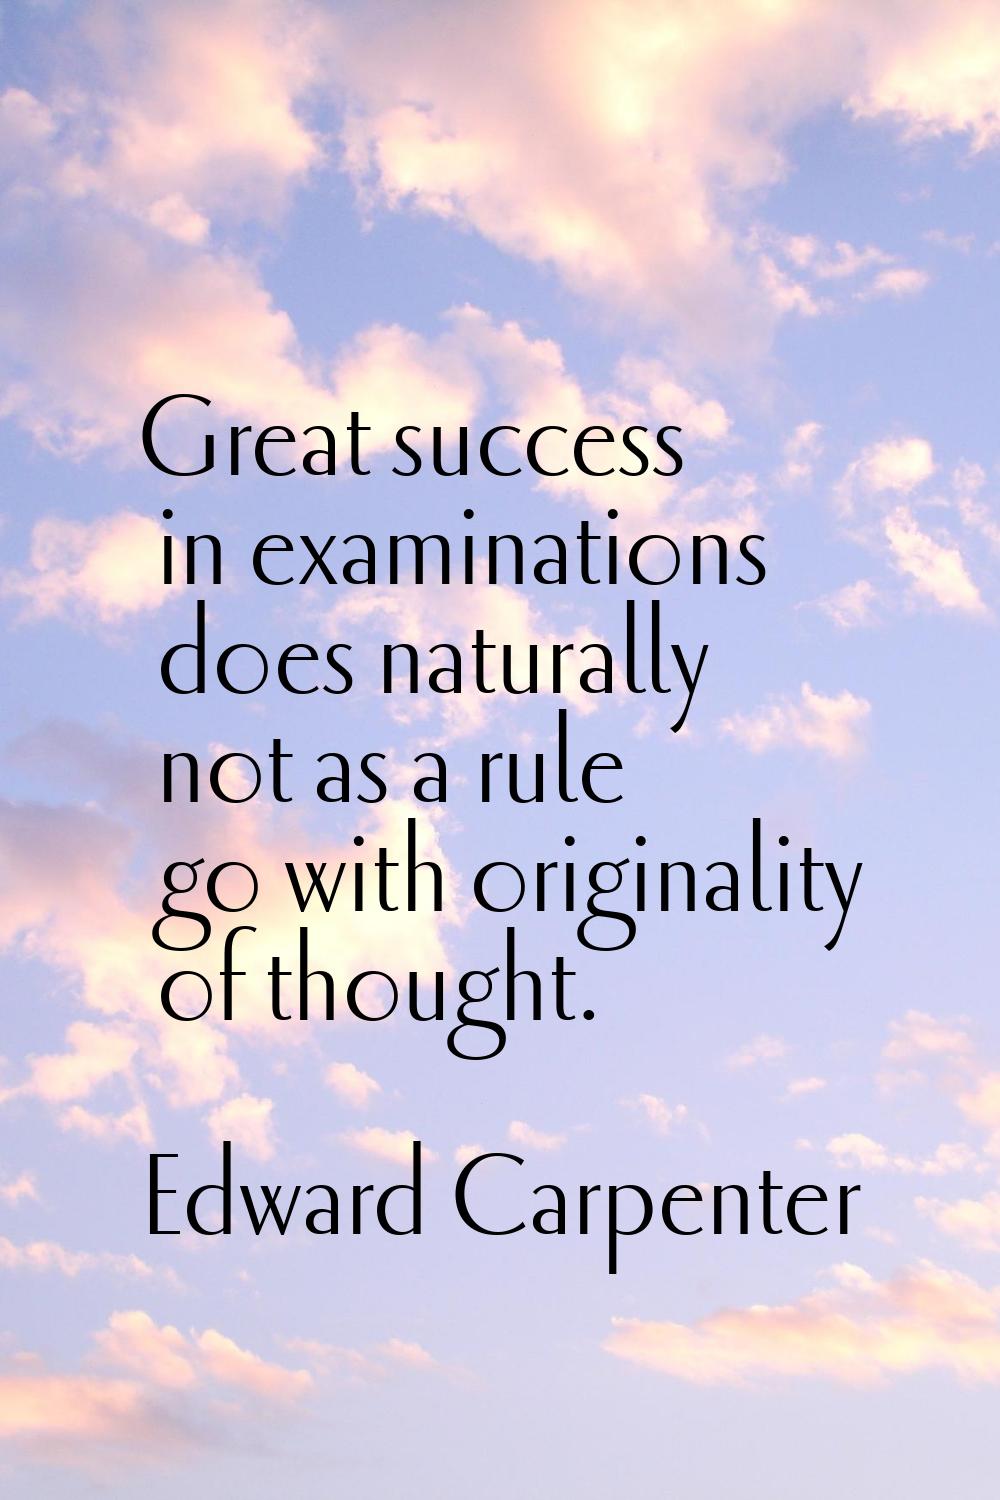 Great success in examinations does naturally not as a rule go with originality of thought.